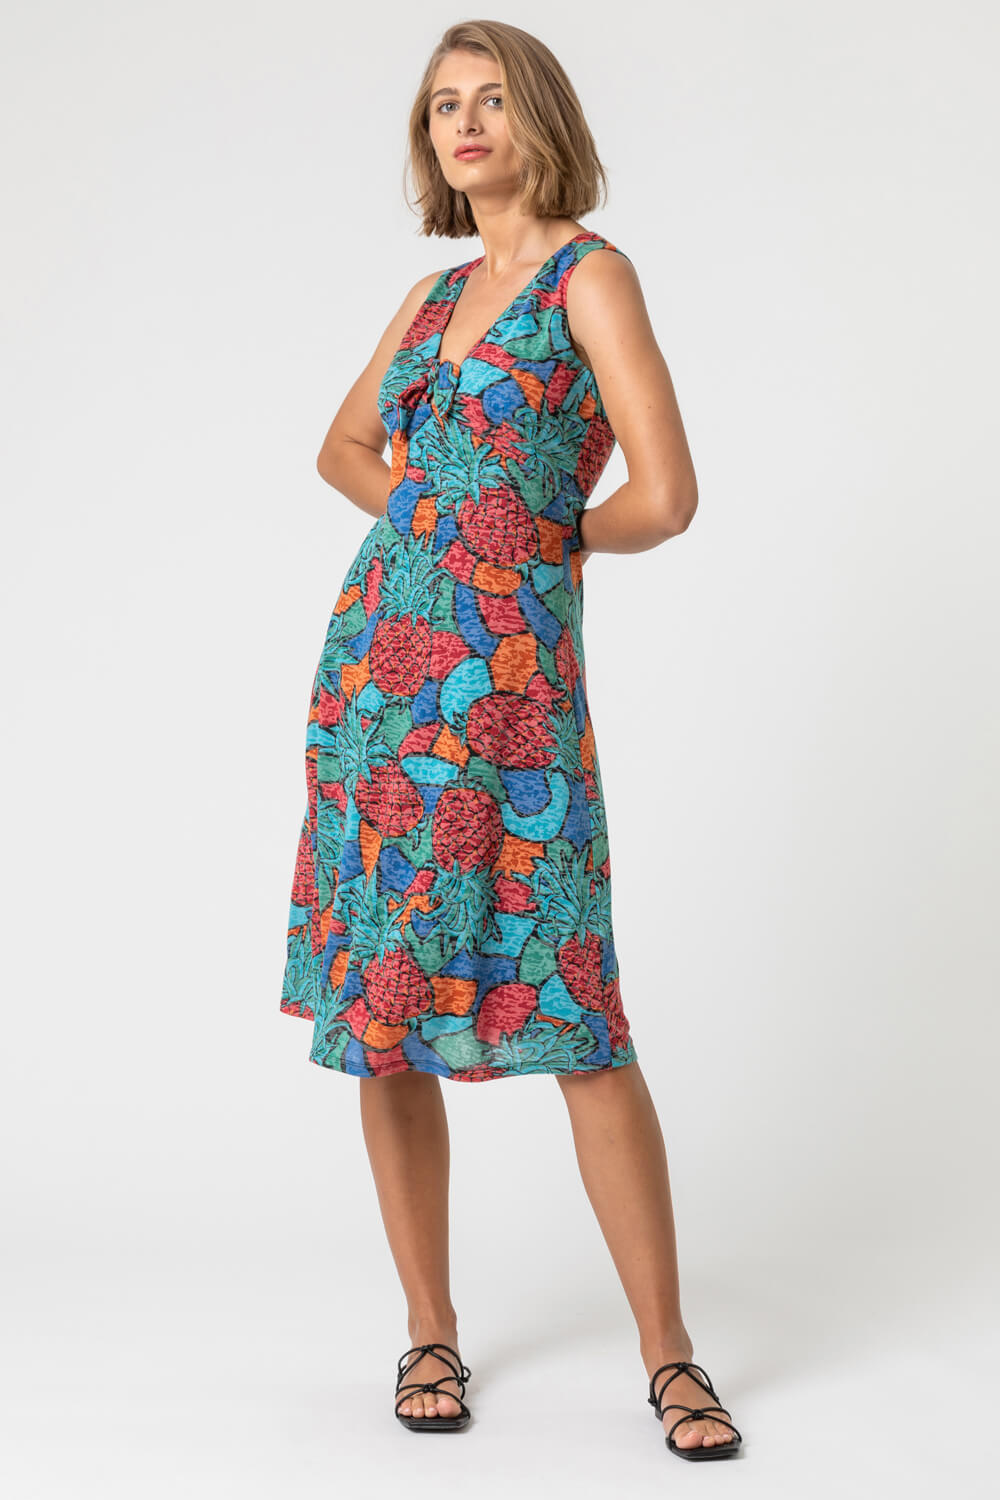 Burnout Pineapple Print Knotted Dress